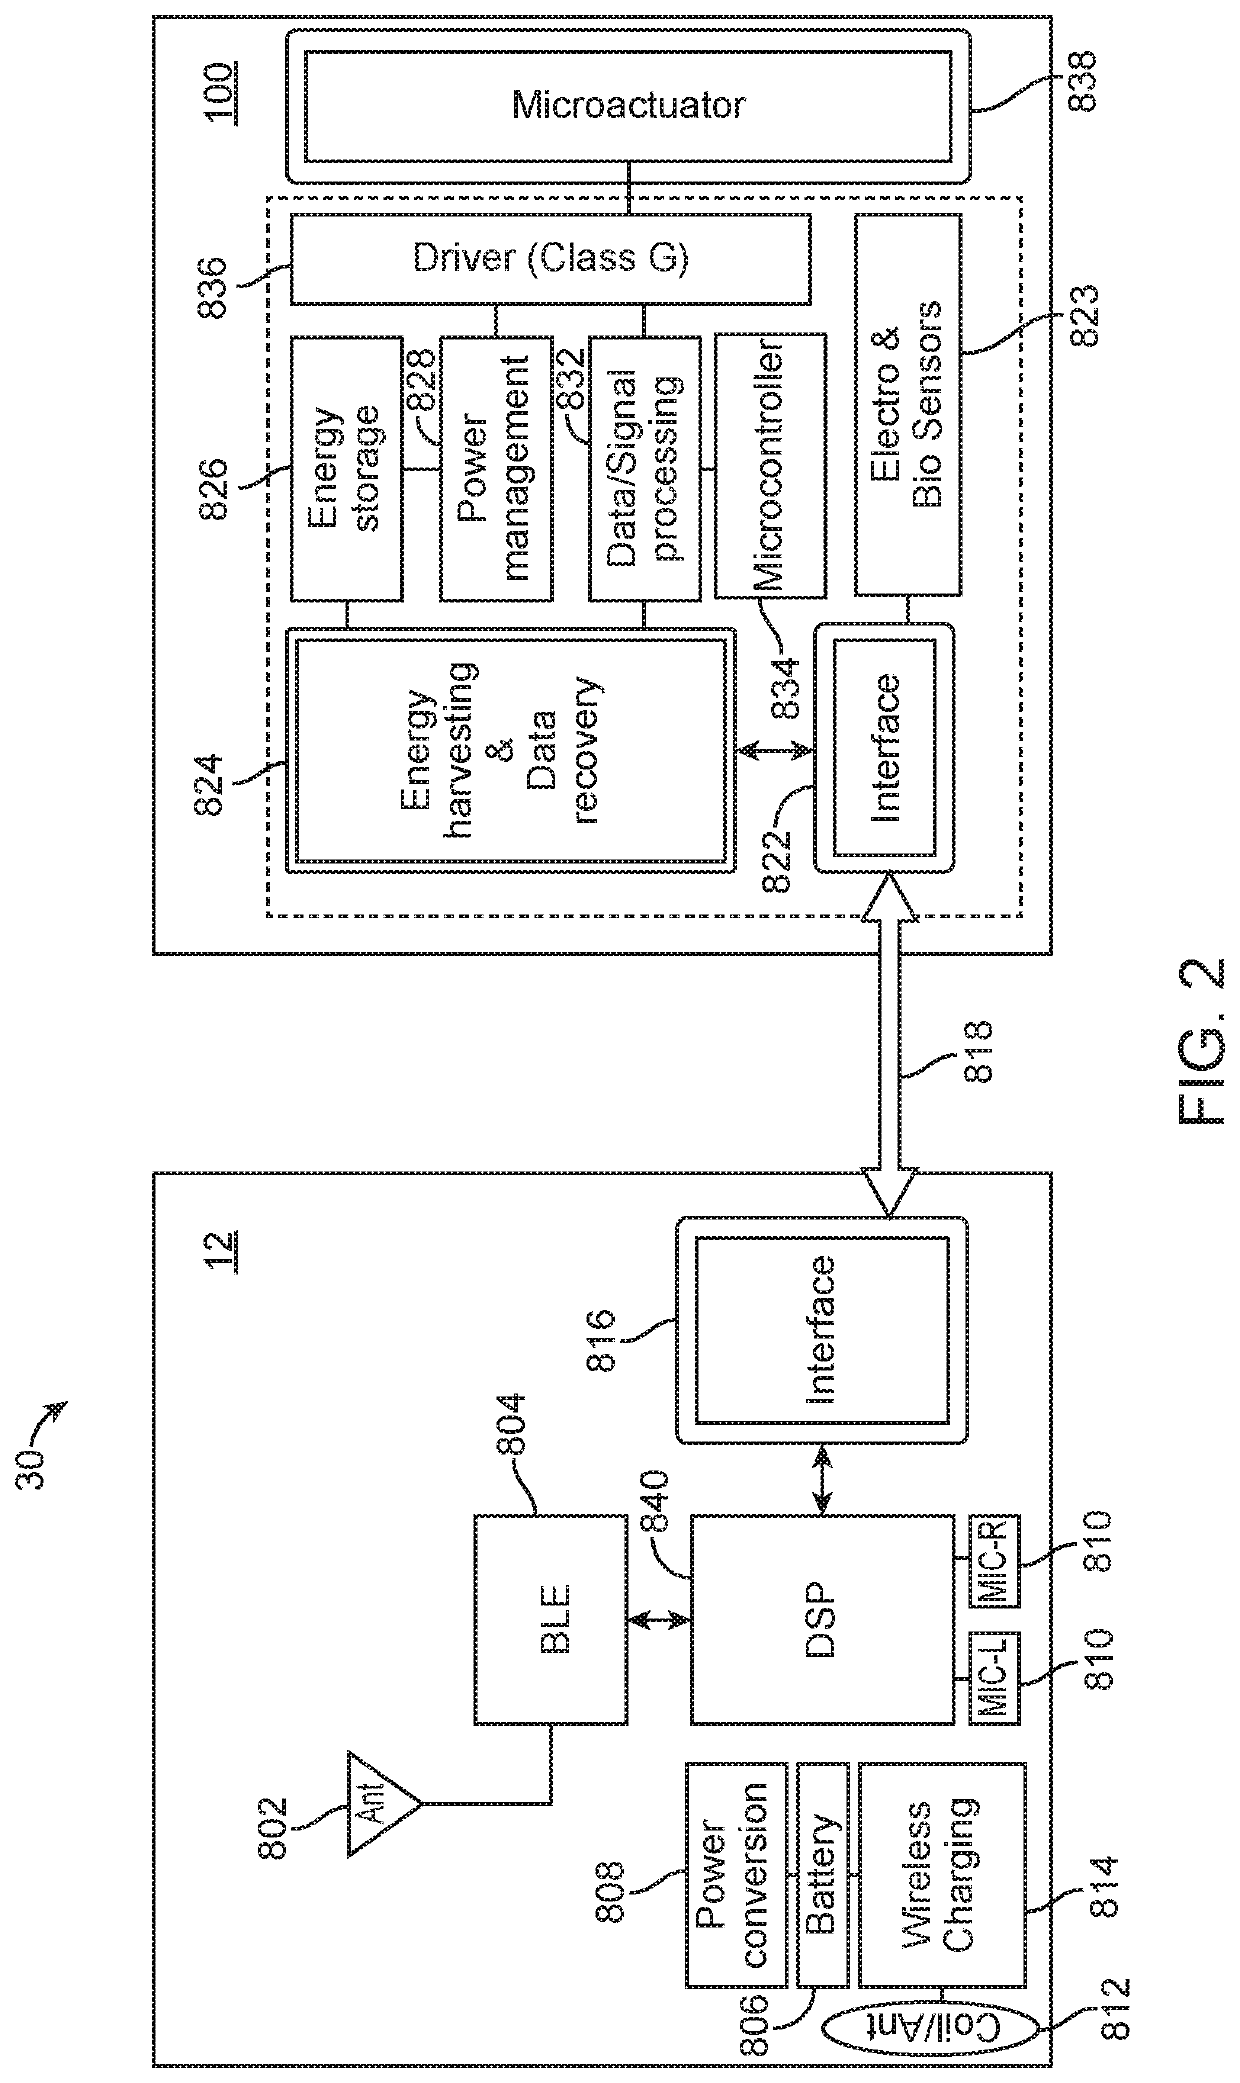 Contact hearing systems, apparatus and methods